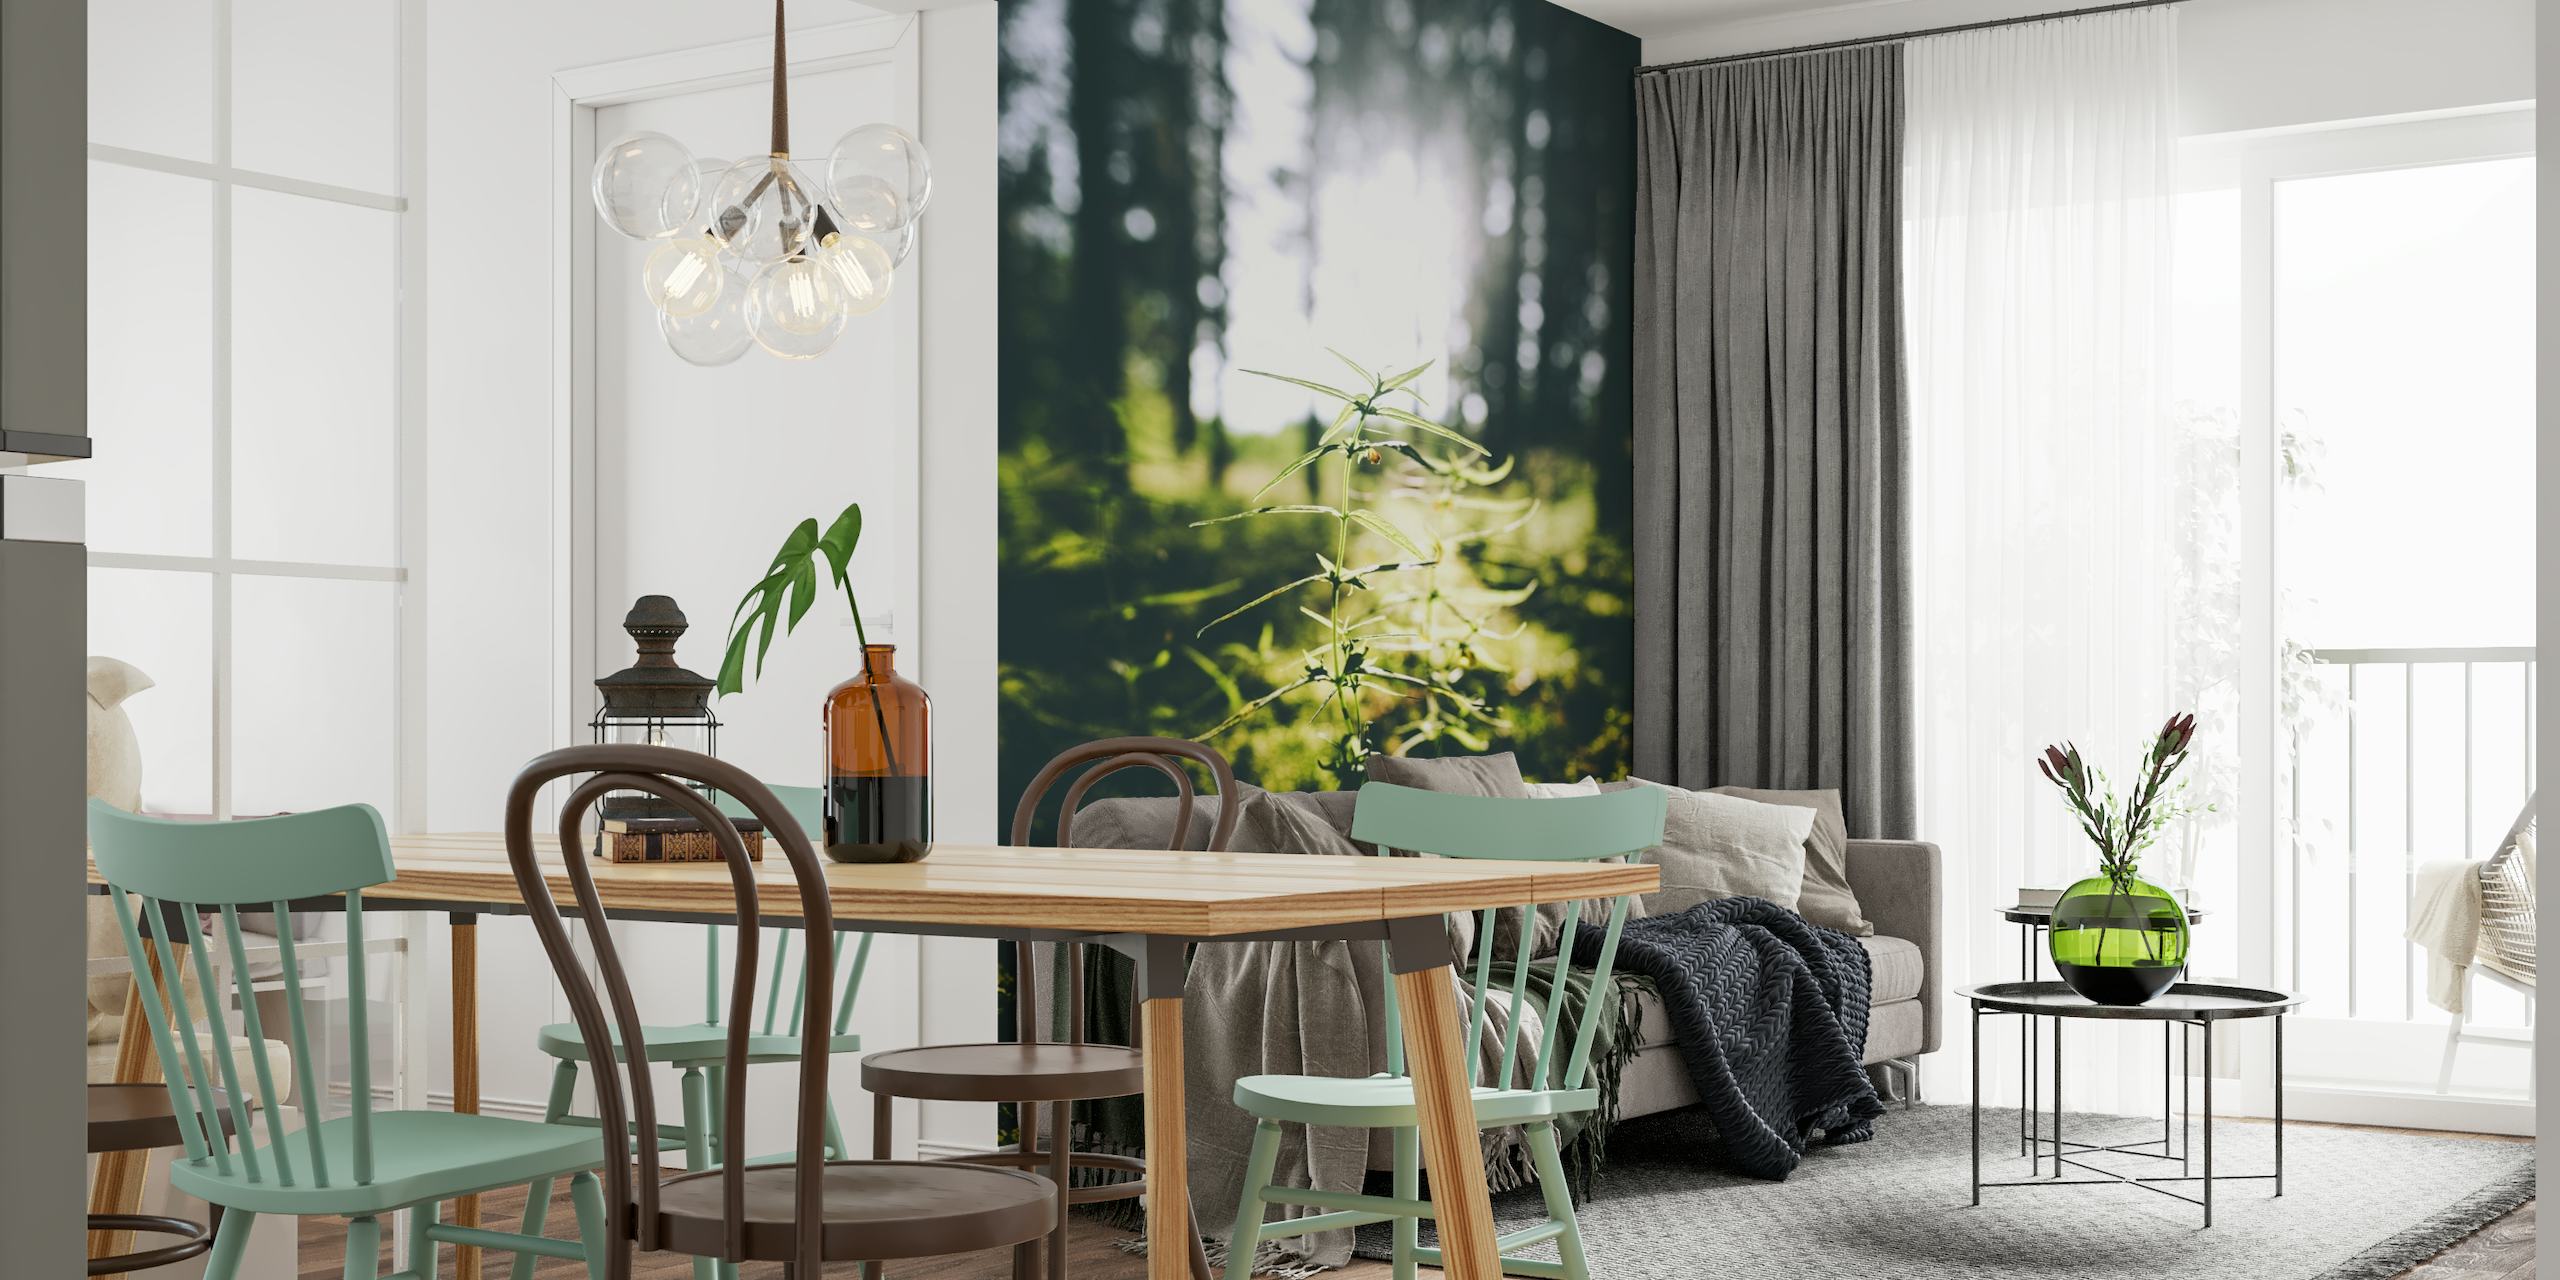 Swedish forest scenery wall mural with sunlight piercing through trees